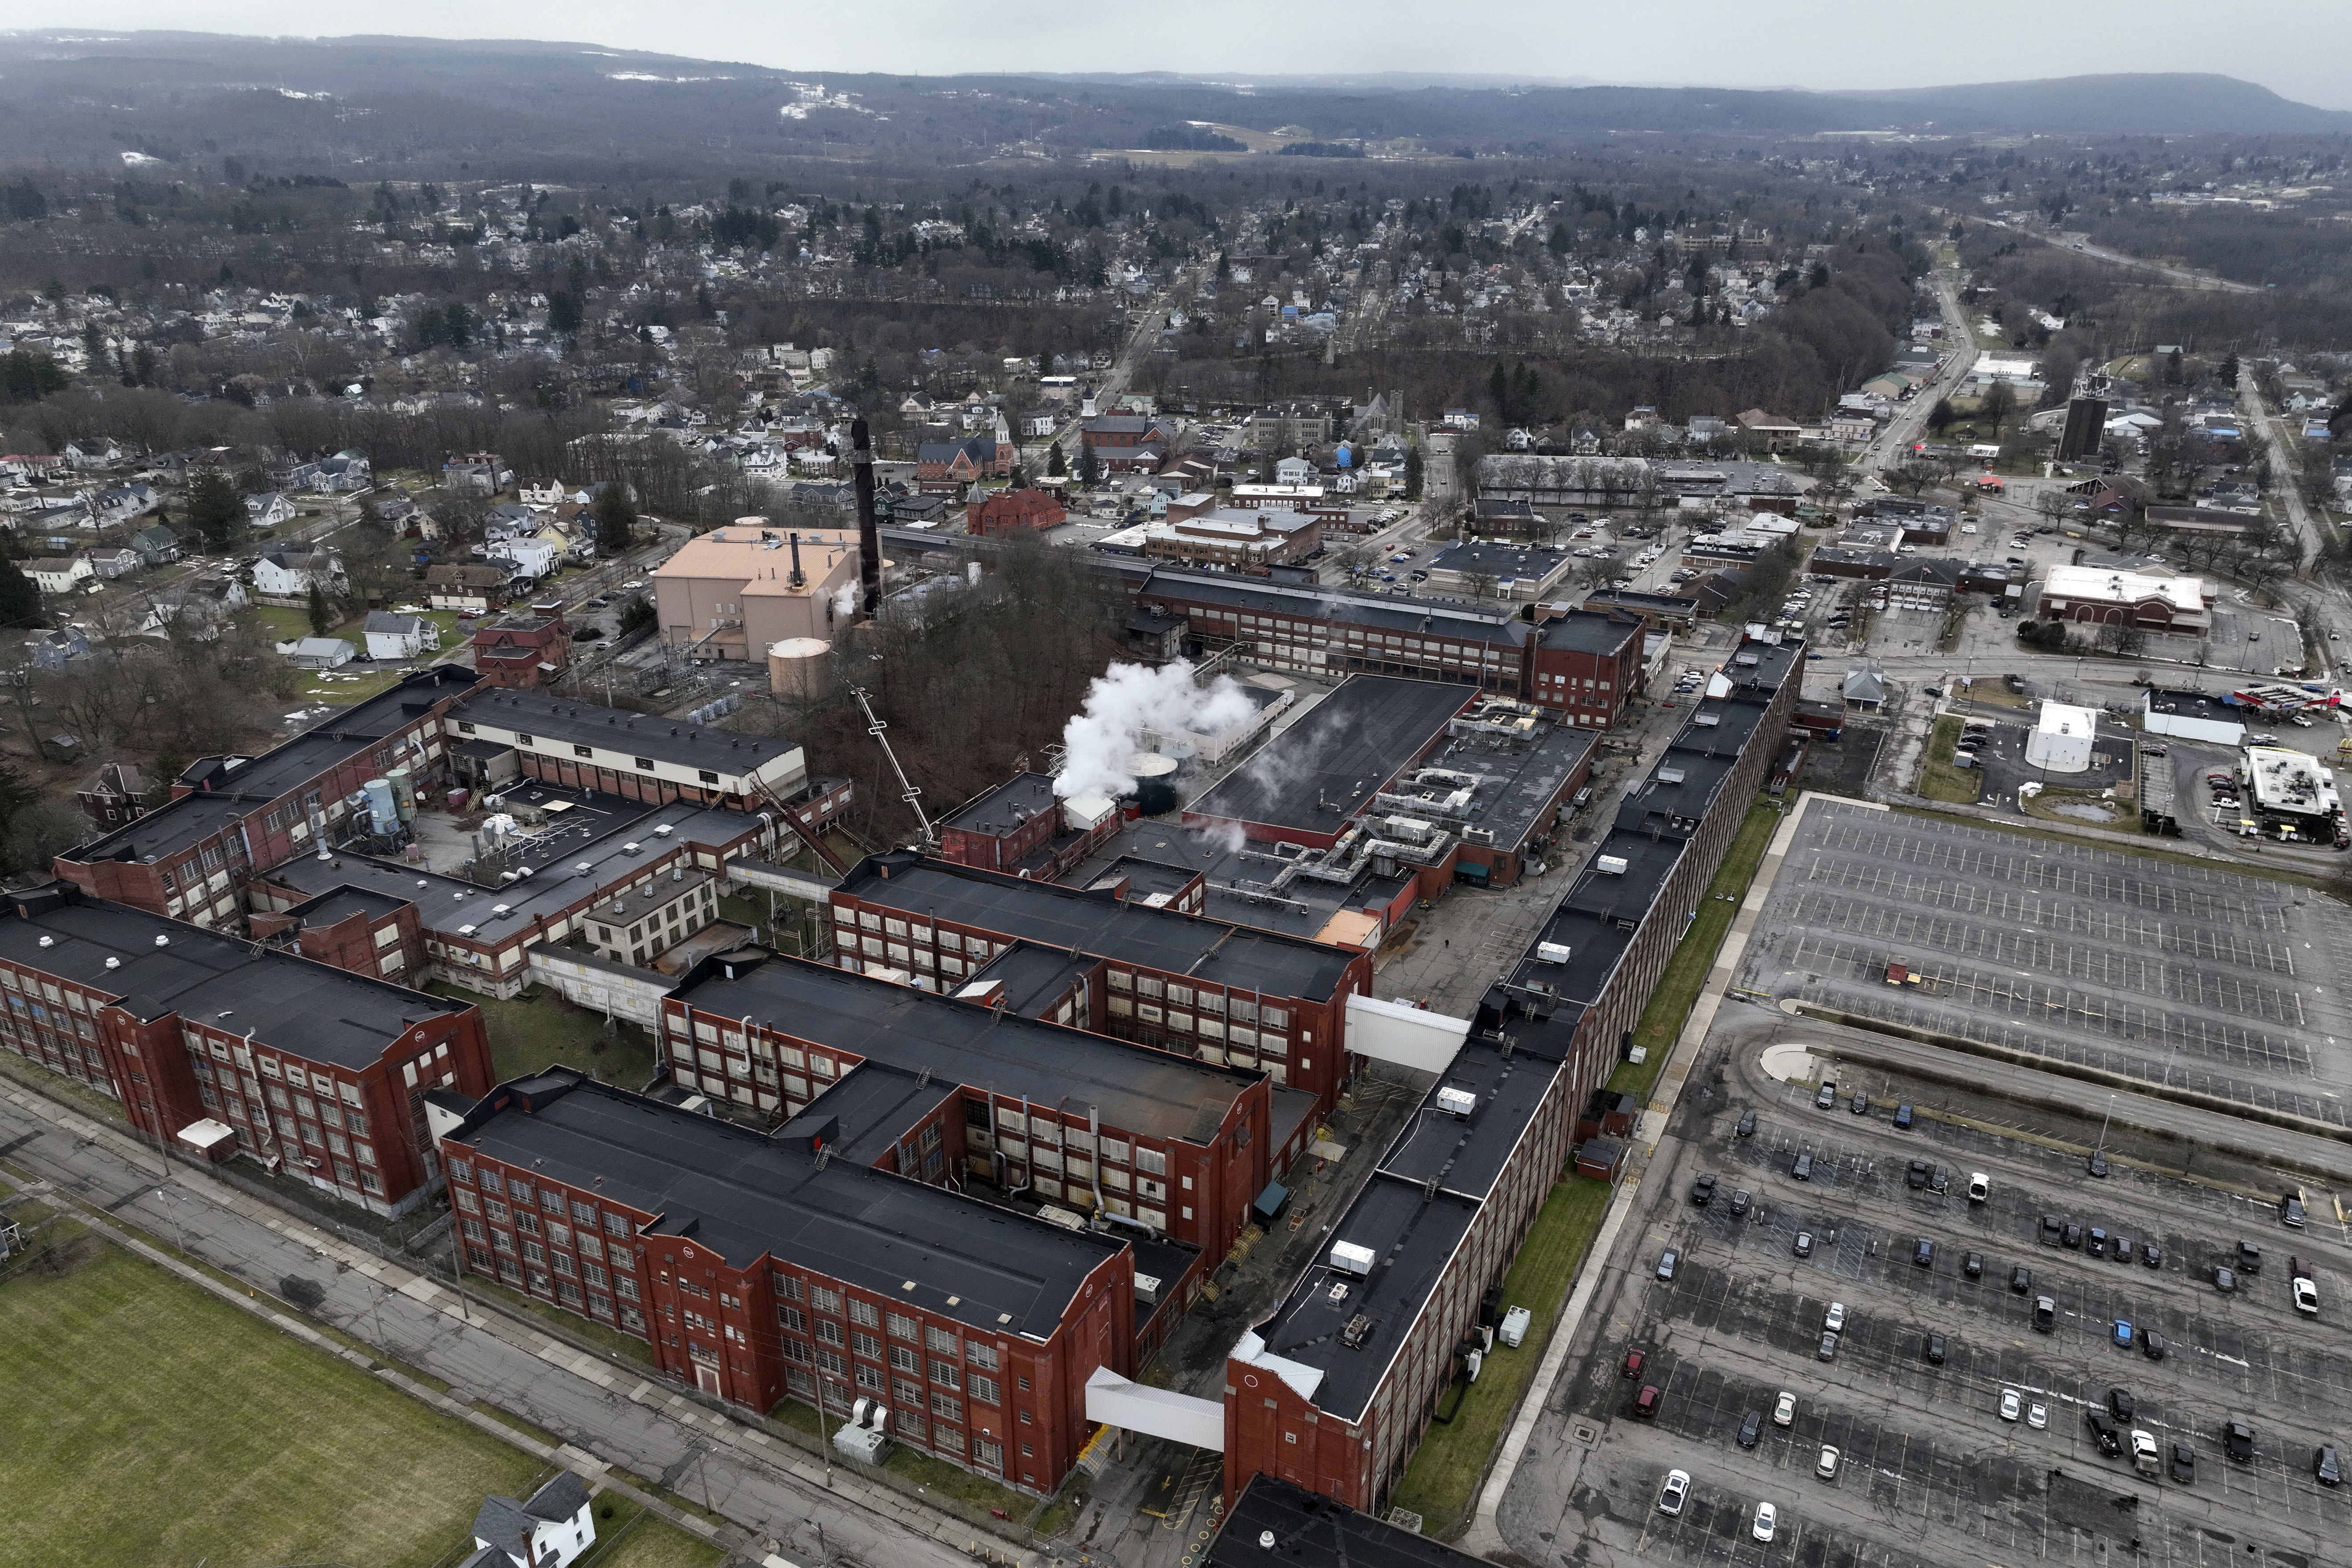 View of Remington Arms Co. compound in Ilion, NY. The oldest gun-maker is moving operations to GA & shutting down the Ilion factory (AP Photo).